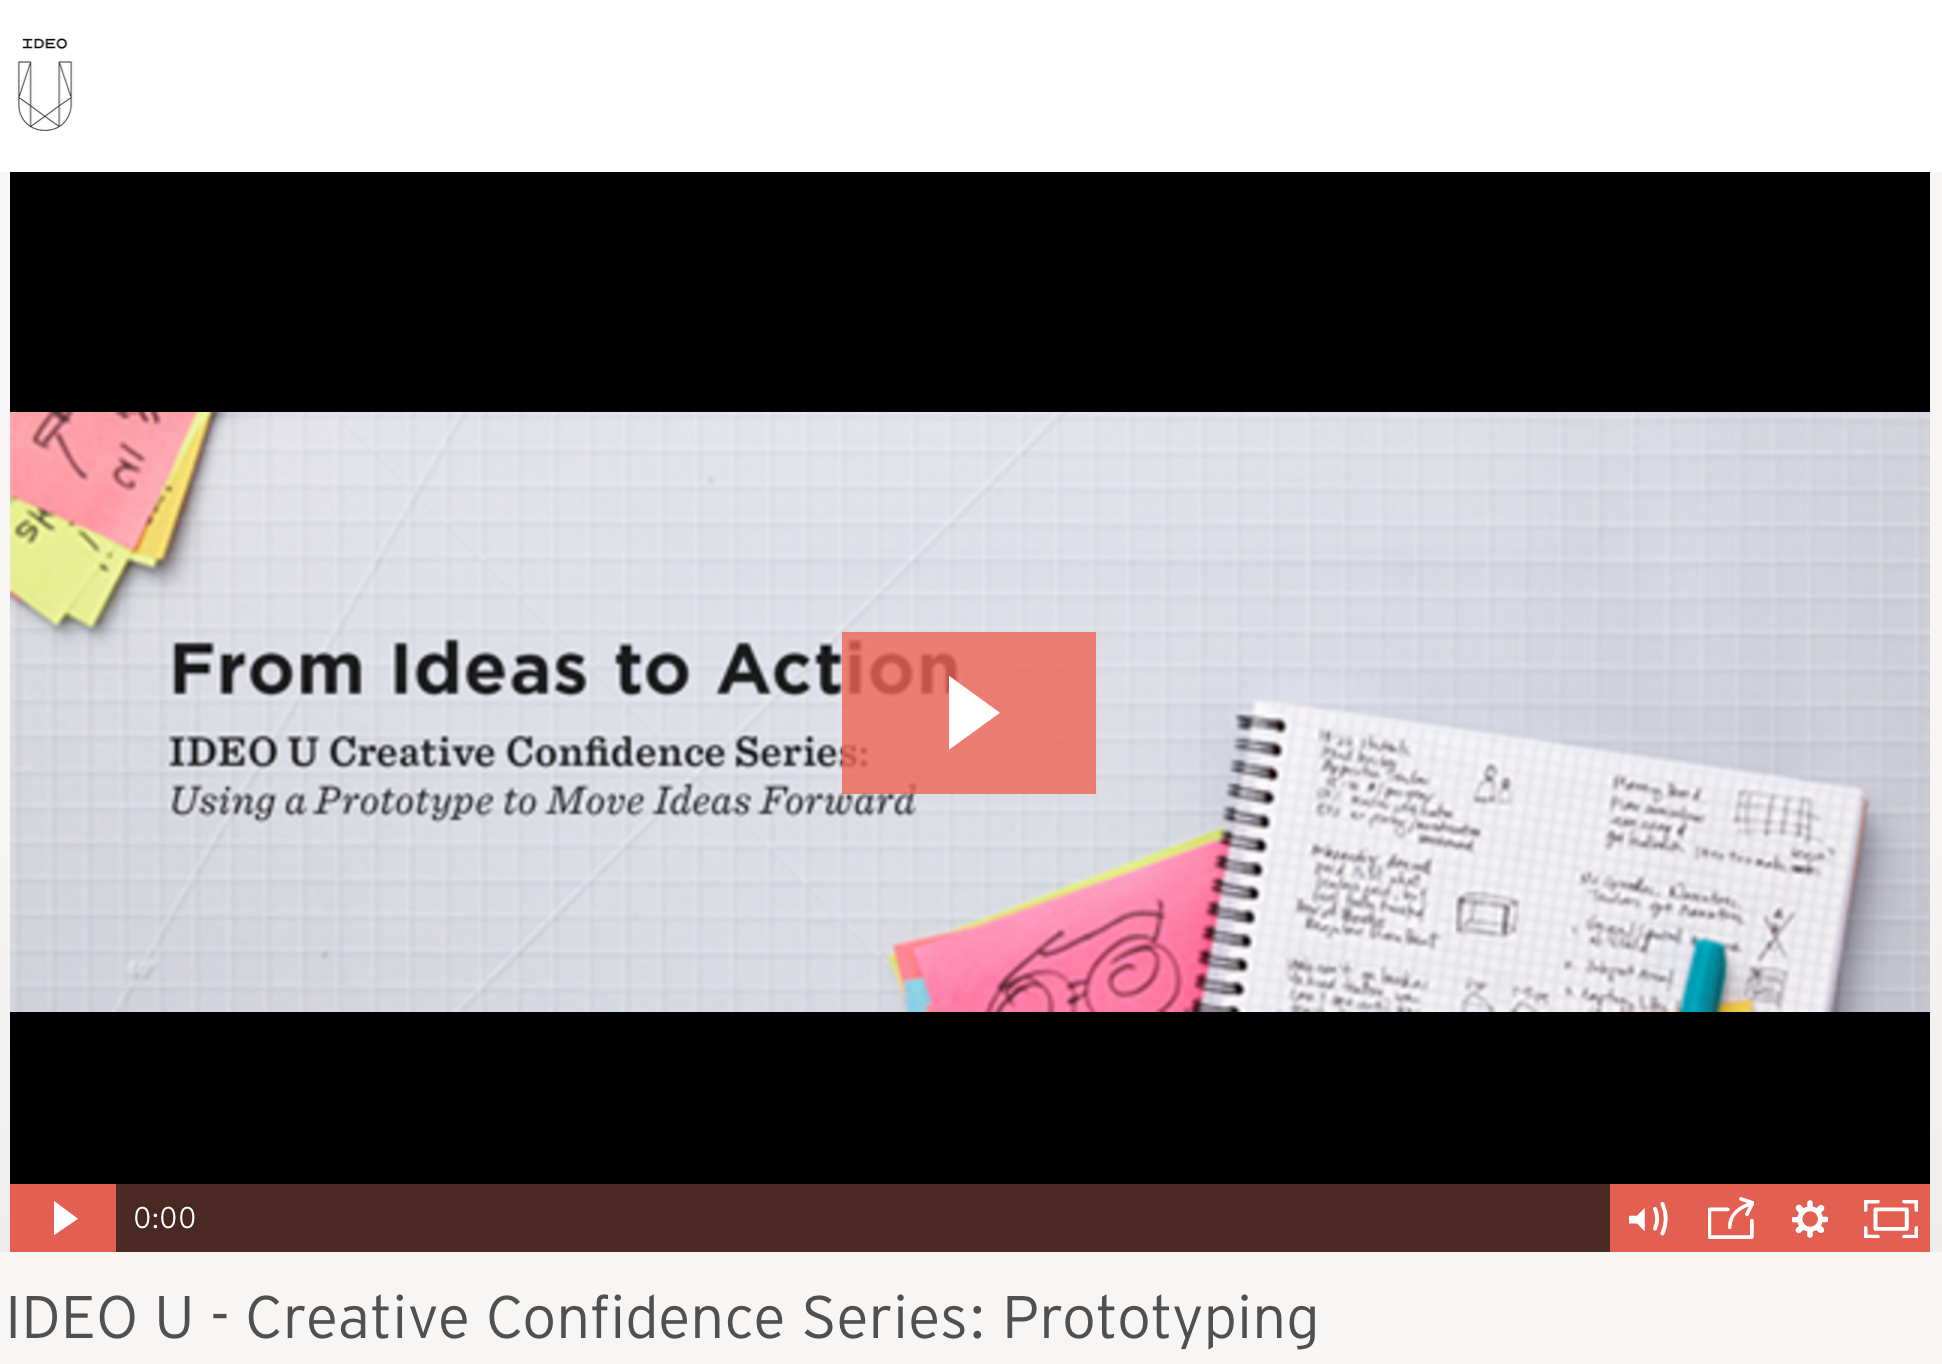 IDEO U Webinar: From Ideas to Action